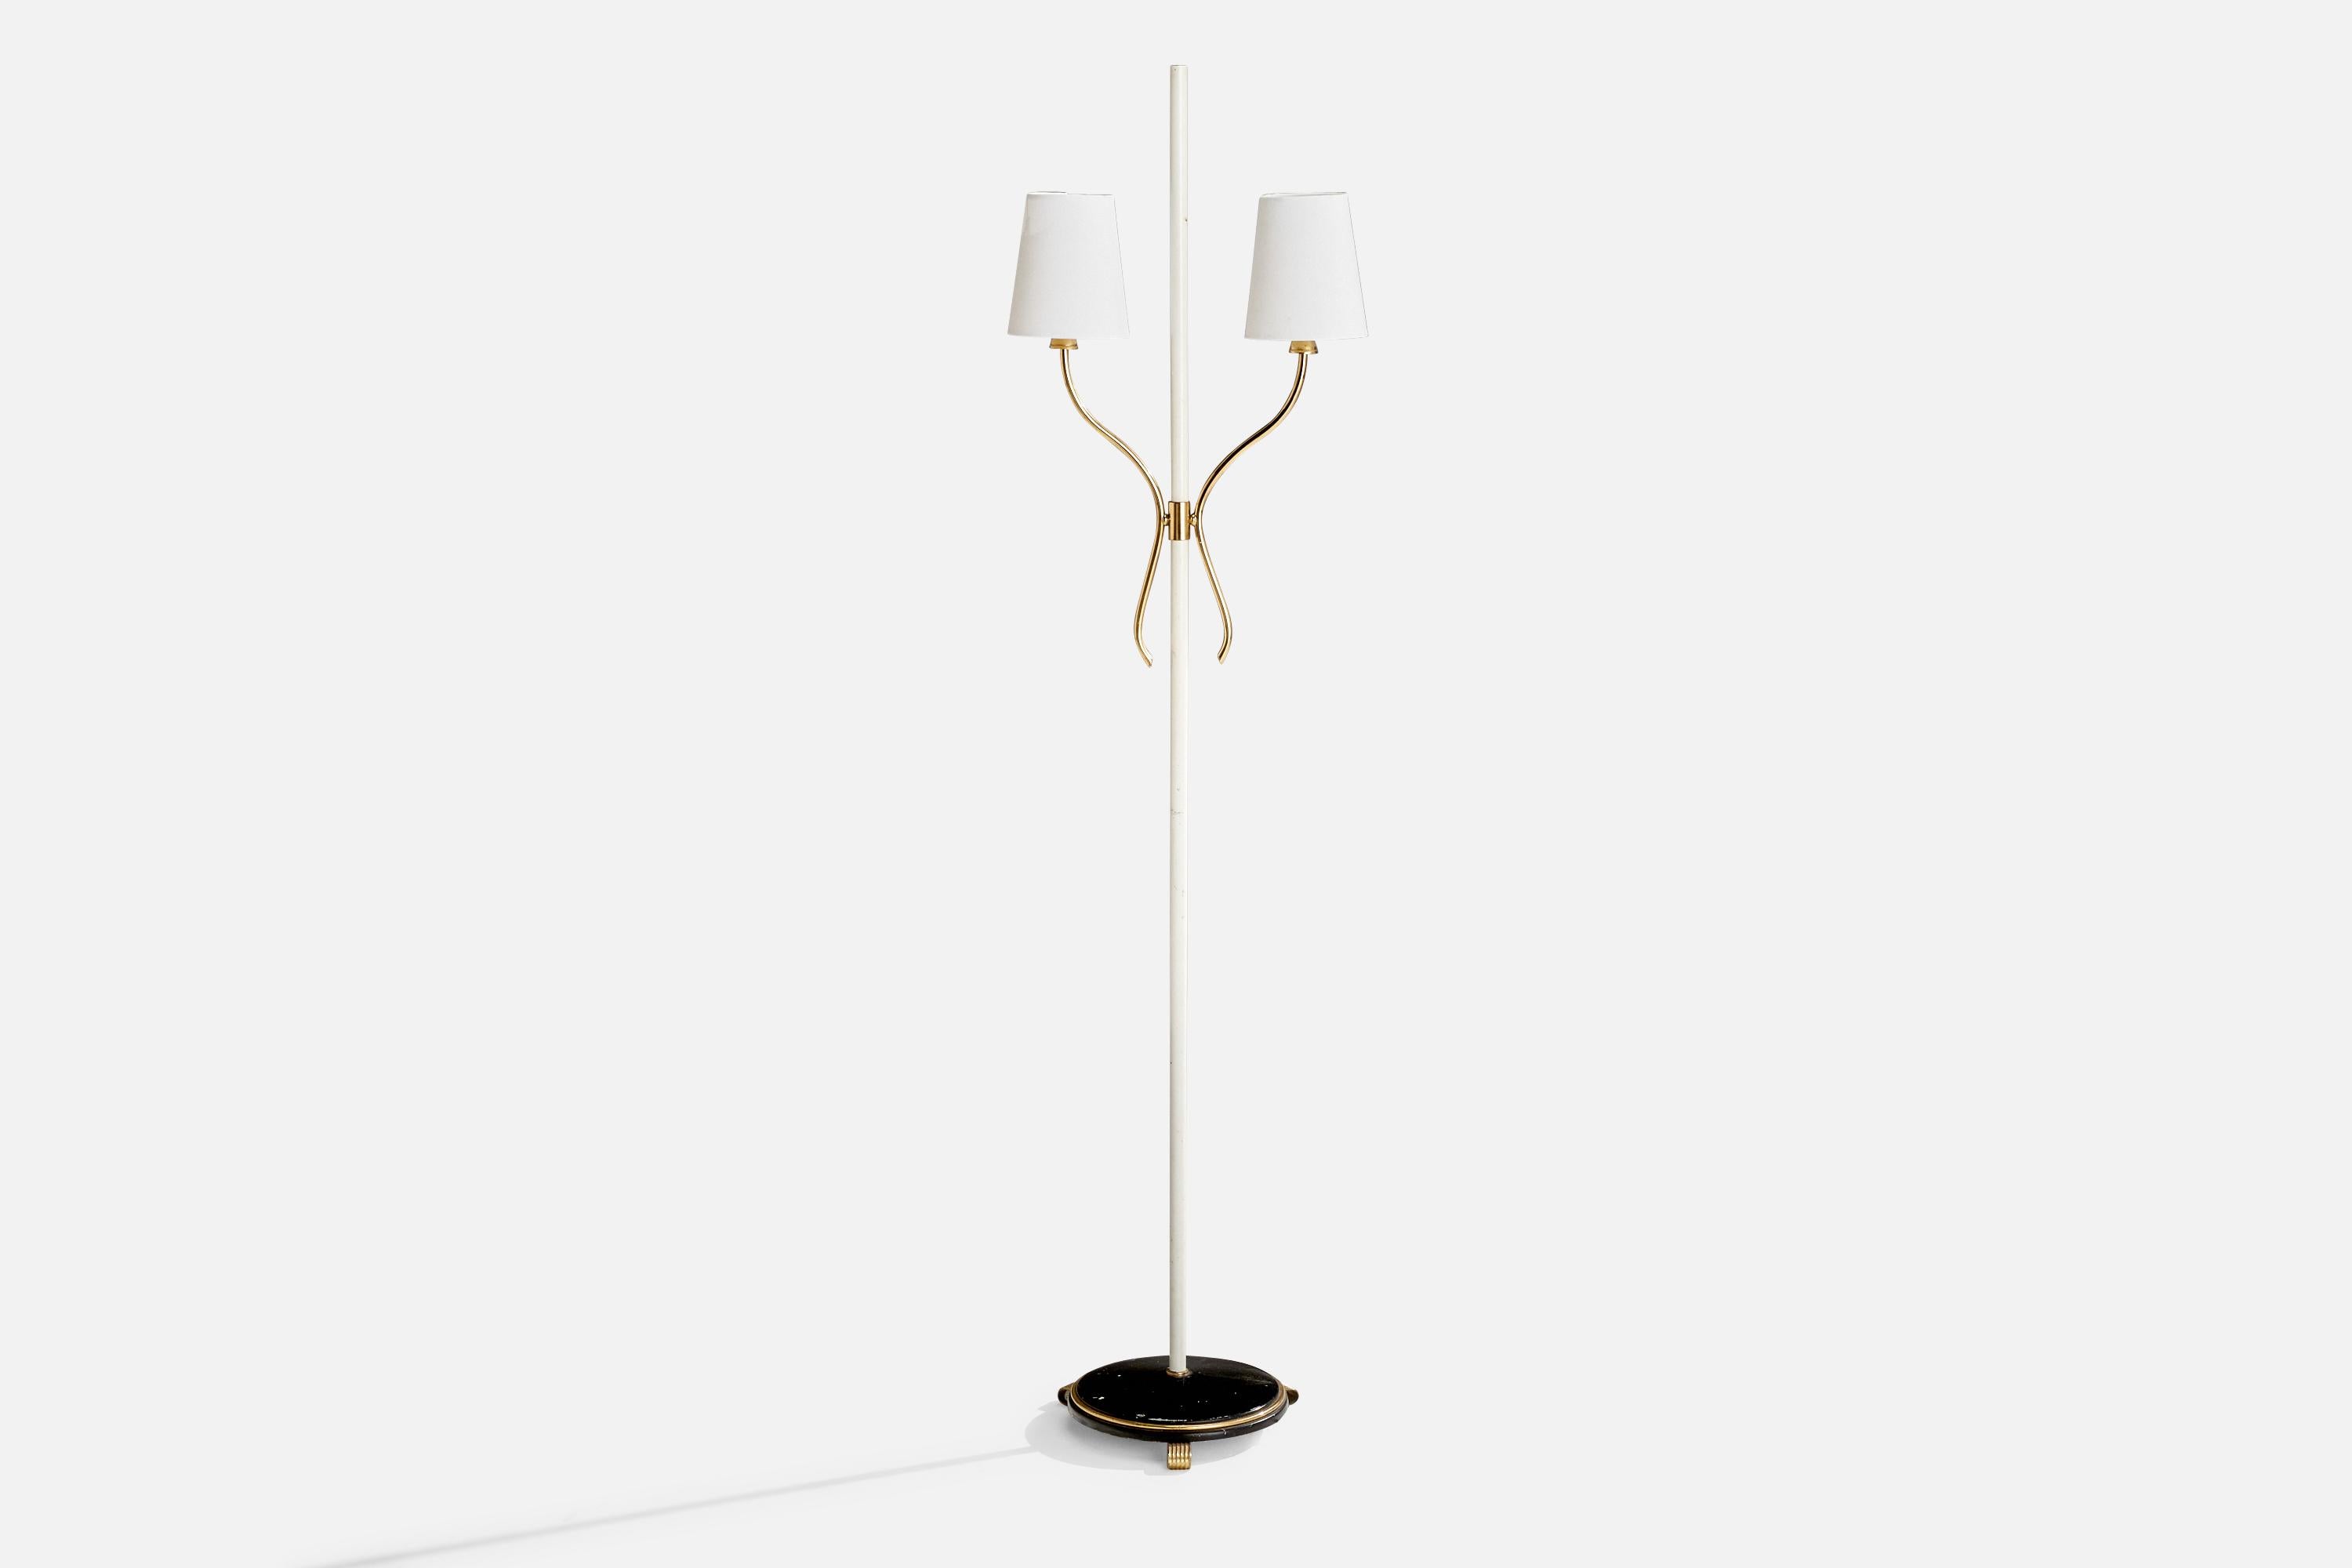 A white and black lacquered metal, brass and white fabric floor lamp designed and produced in Sweden, 1950s.

Overall Dimensions (inches): 58.75” H x 15” W x 8.5” D
Stated dimensions include shade.
Bulb Specifications: E-26 Bulb
Number of Sockets: